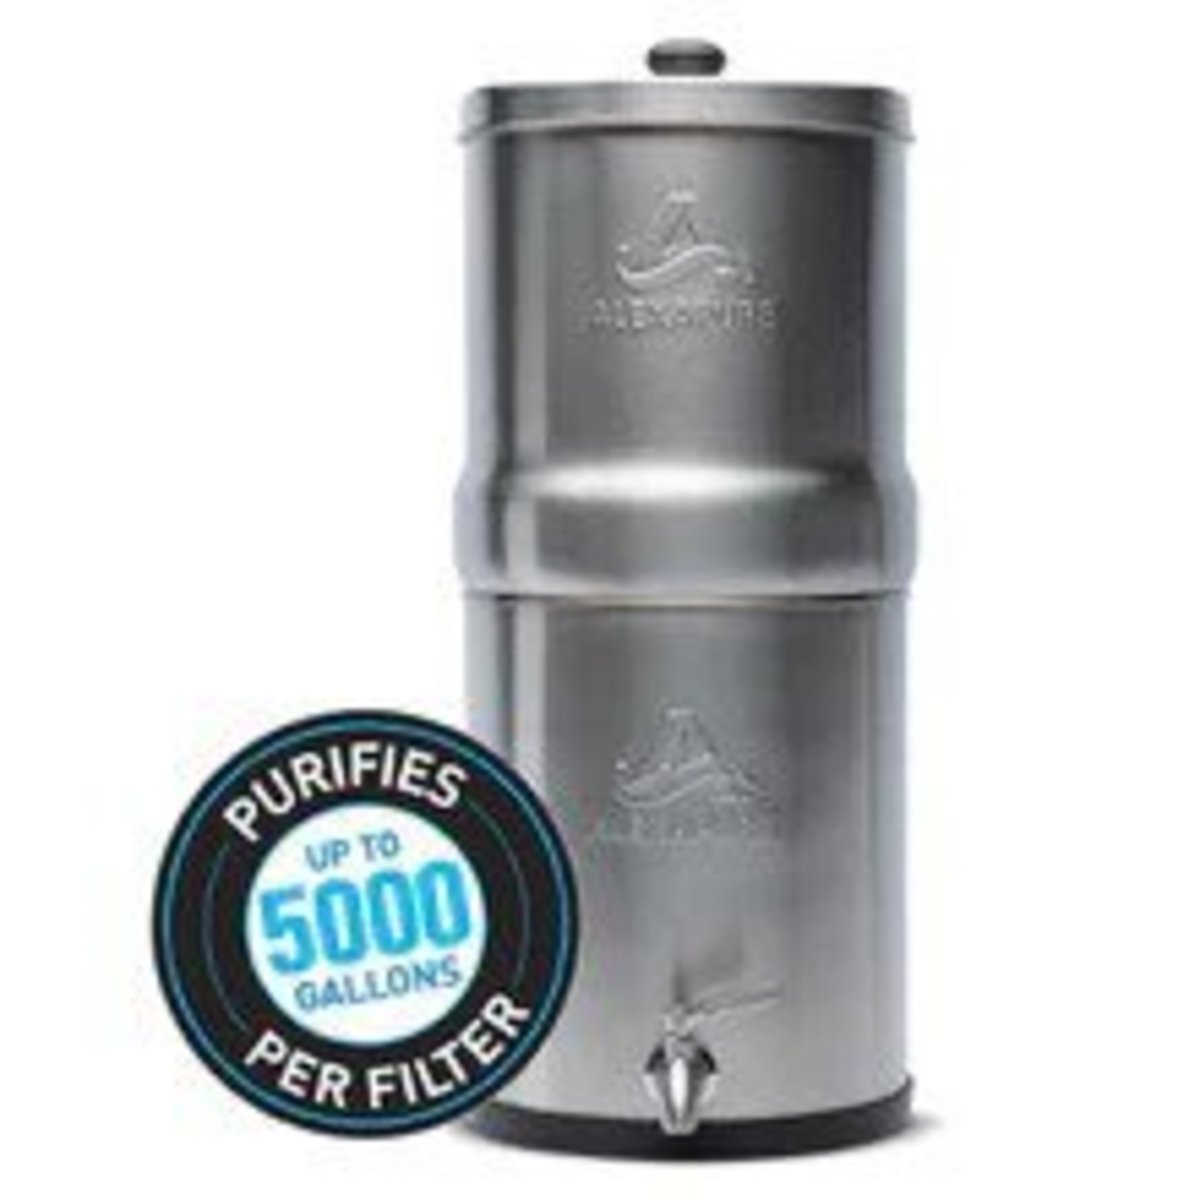 water-filtration-at-home-and-on-the-go